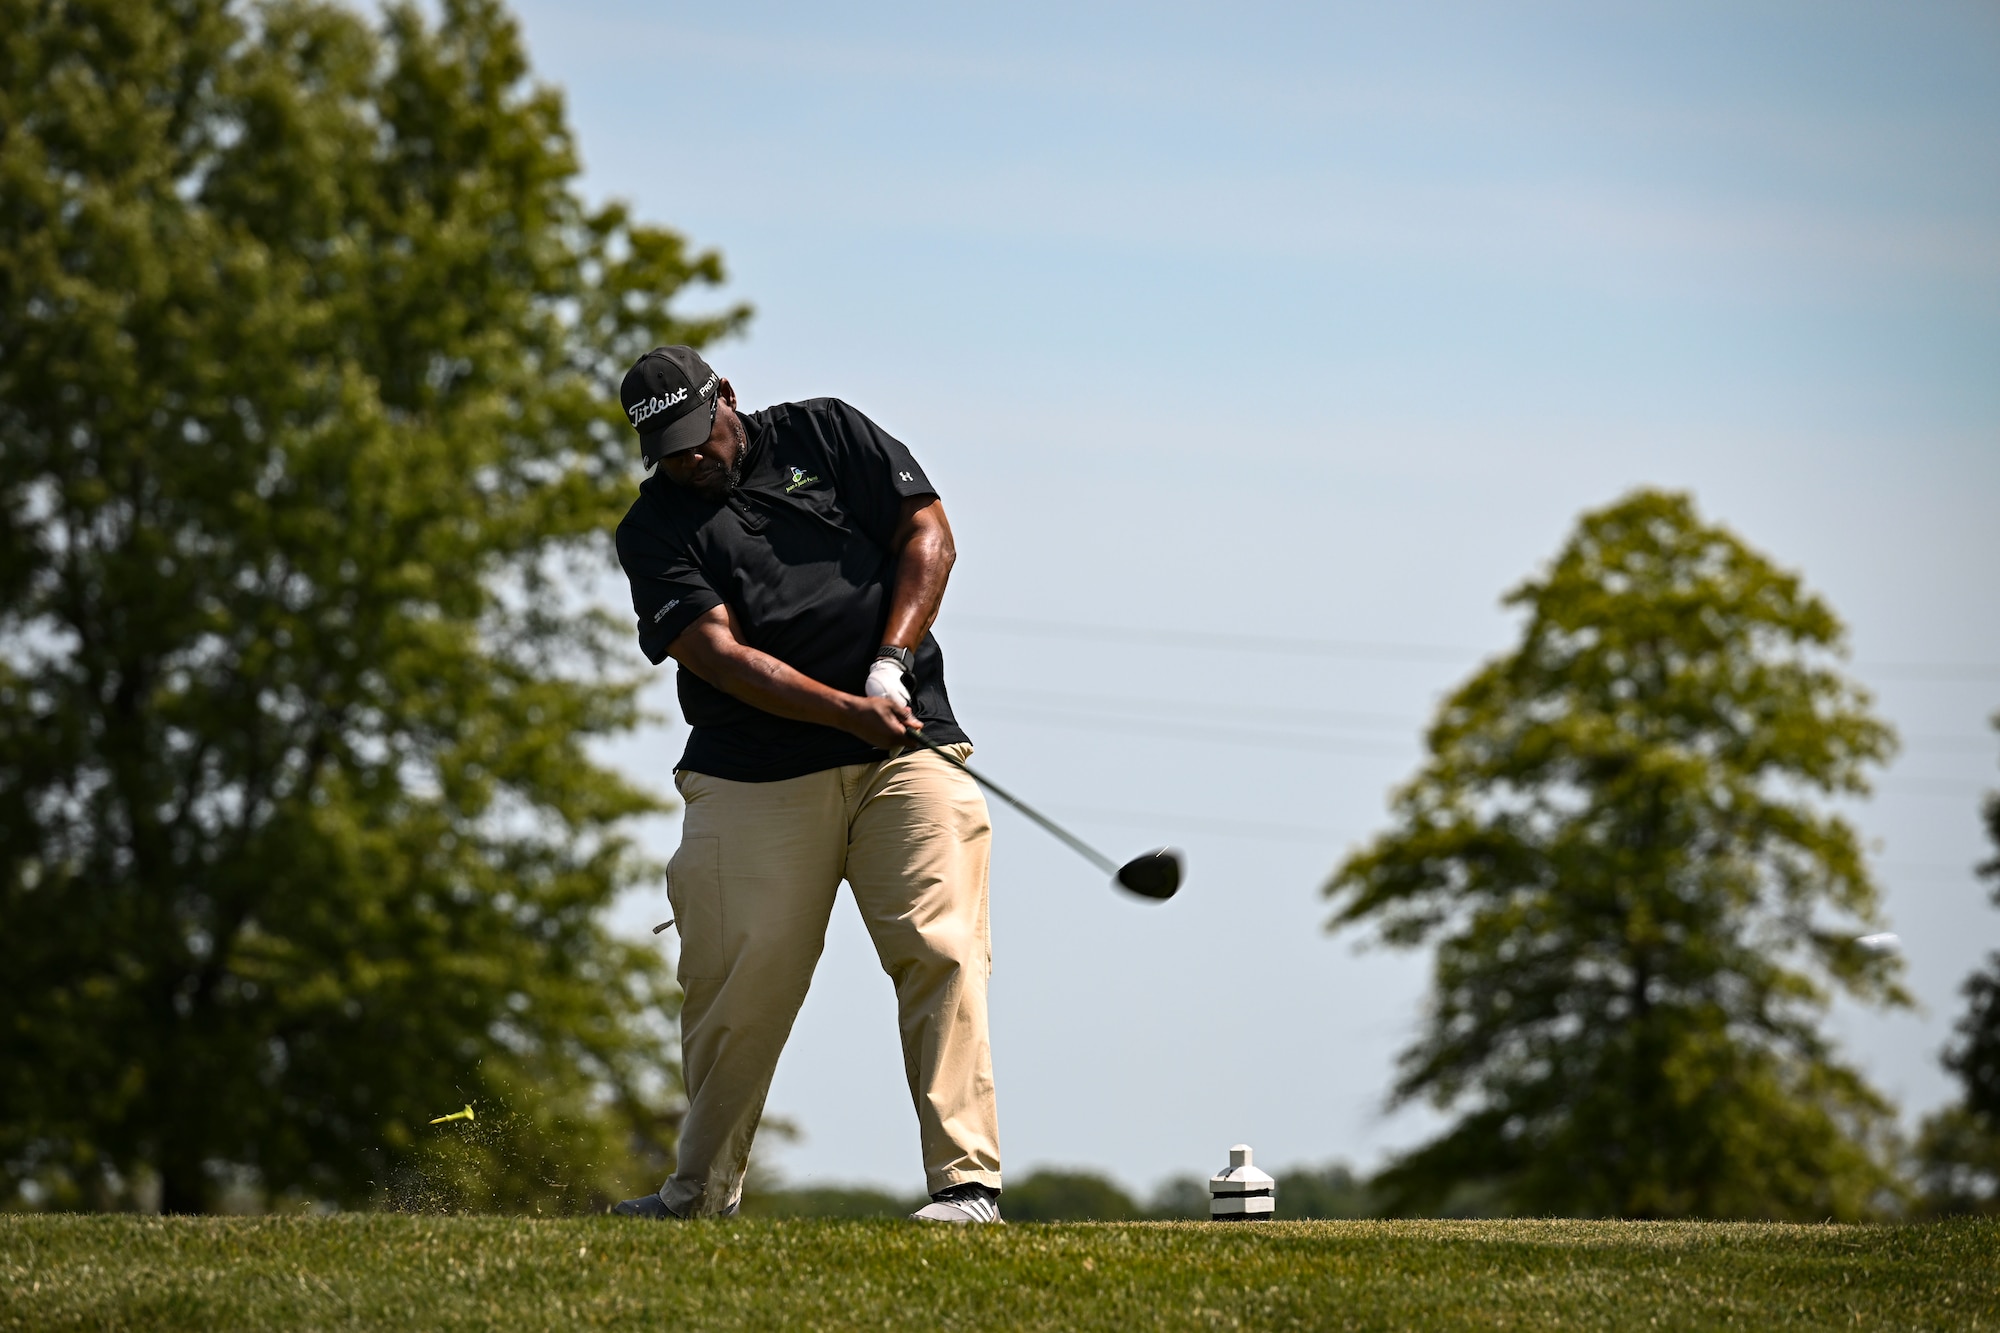 A participant tees off during the Bluesuiters Golf Tournament at Jonathan’s Landing Golf Course in Magnolia, Delaware, May 11, 2023. Bluesuiters is a biannual golf tournament aimed at connecting Team Dover Airmen with local civic and business leaders. (U.S. Air Force photo by Staff Sgt. Marco A. Gomez)